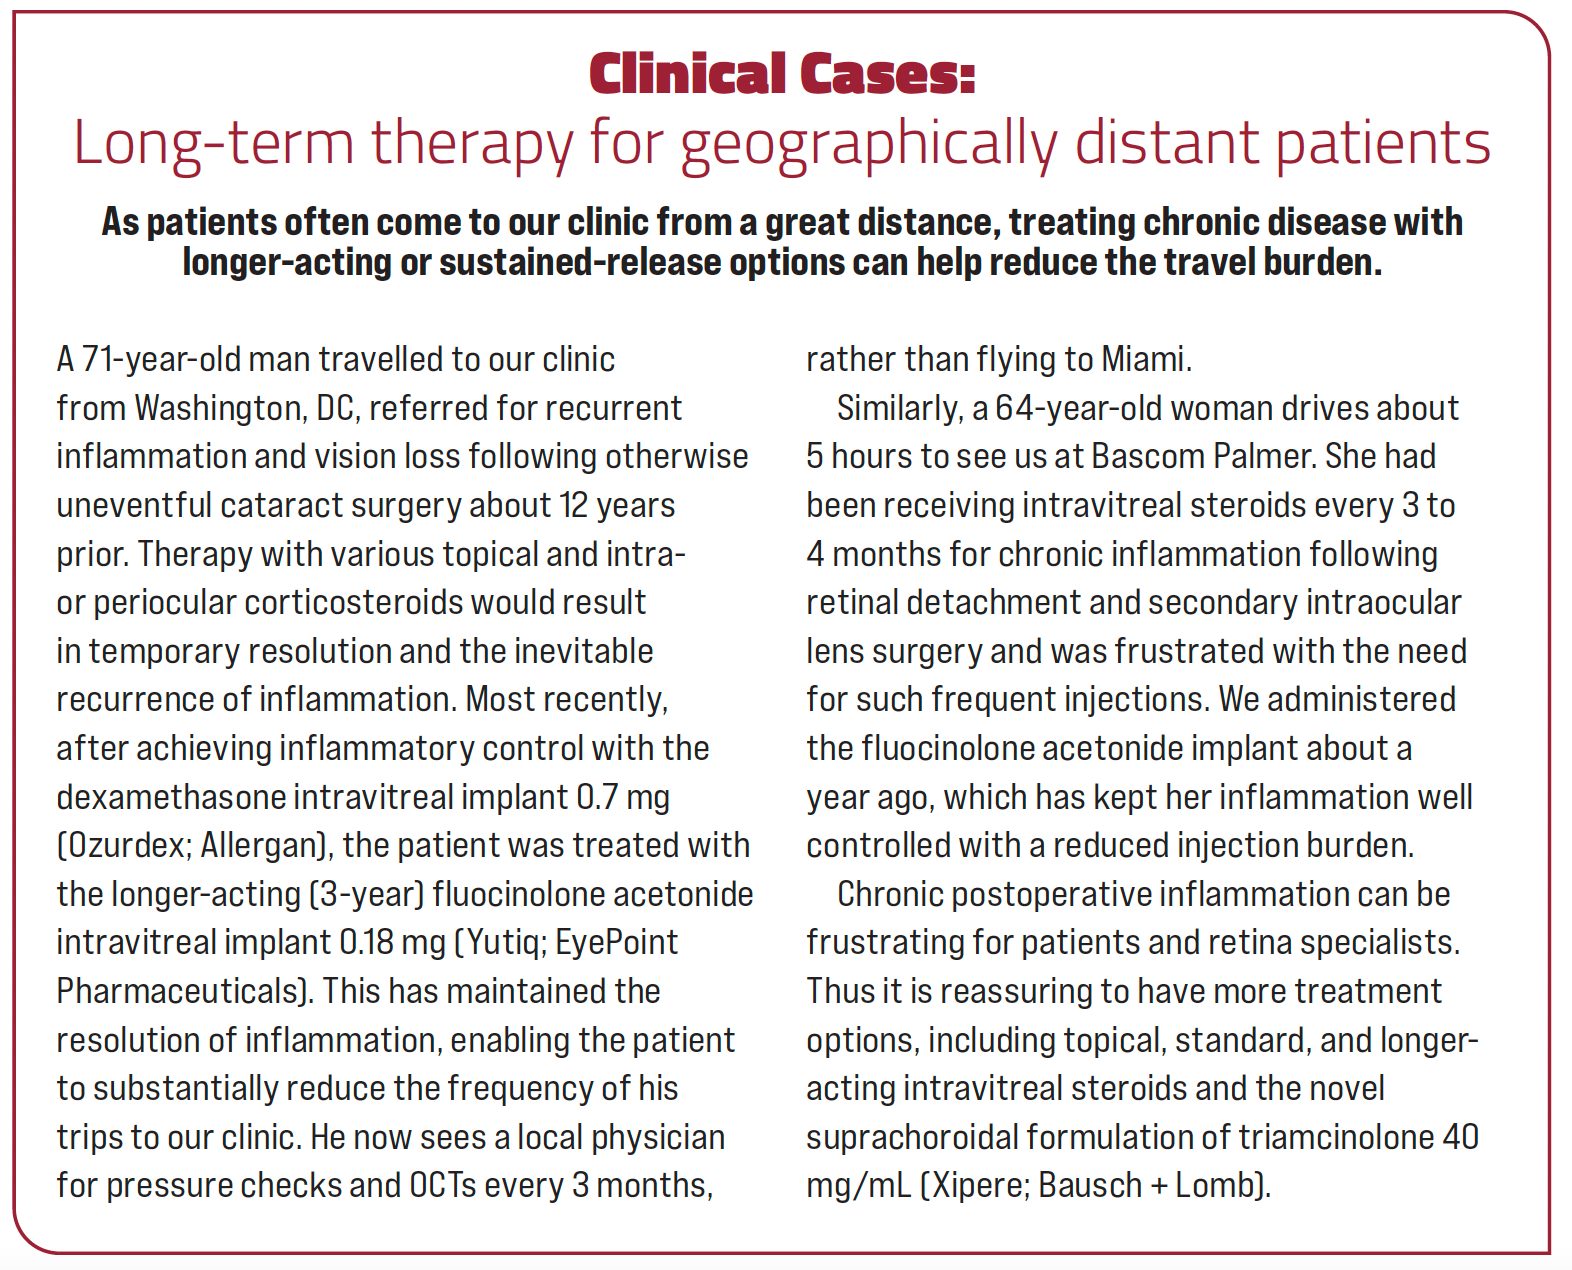 Clinical cases: Long-term therapy for geographically distant patients